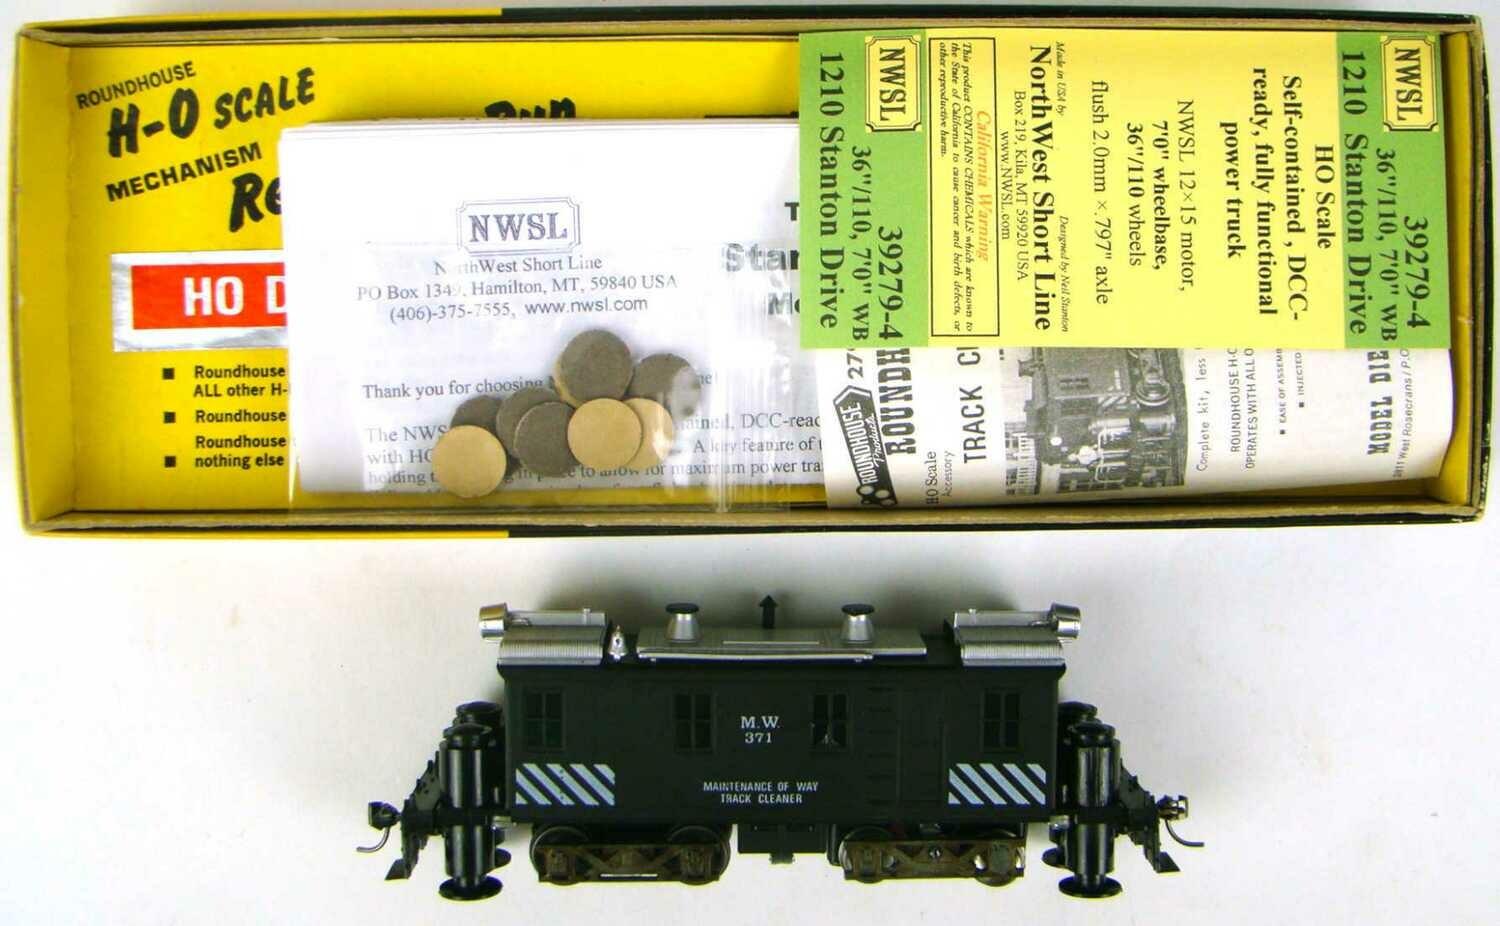 MRRHQ Custom Roundhouse 2800 MOW Alco Box Cab Diesel Track Cleaner Locomotive w/NWSL Stanton Drive & Directional F&R LED Lighting HO Scale